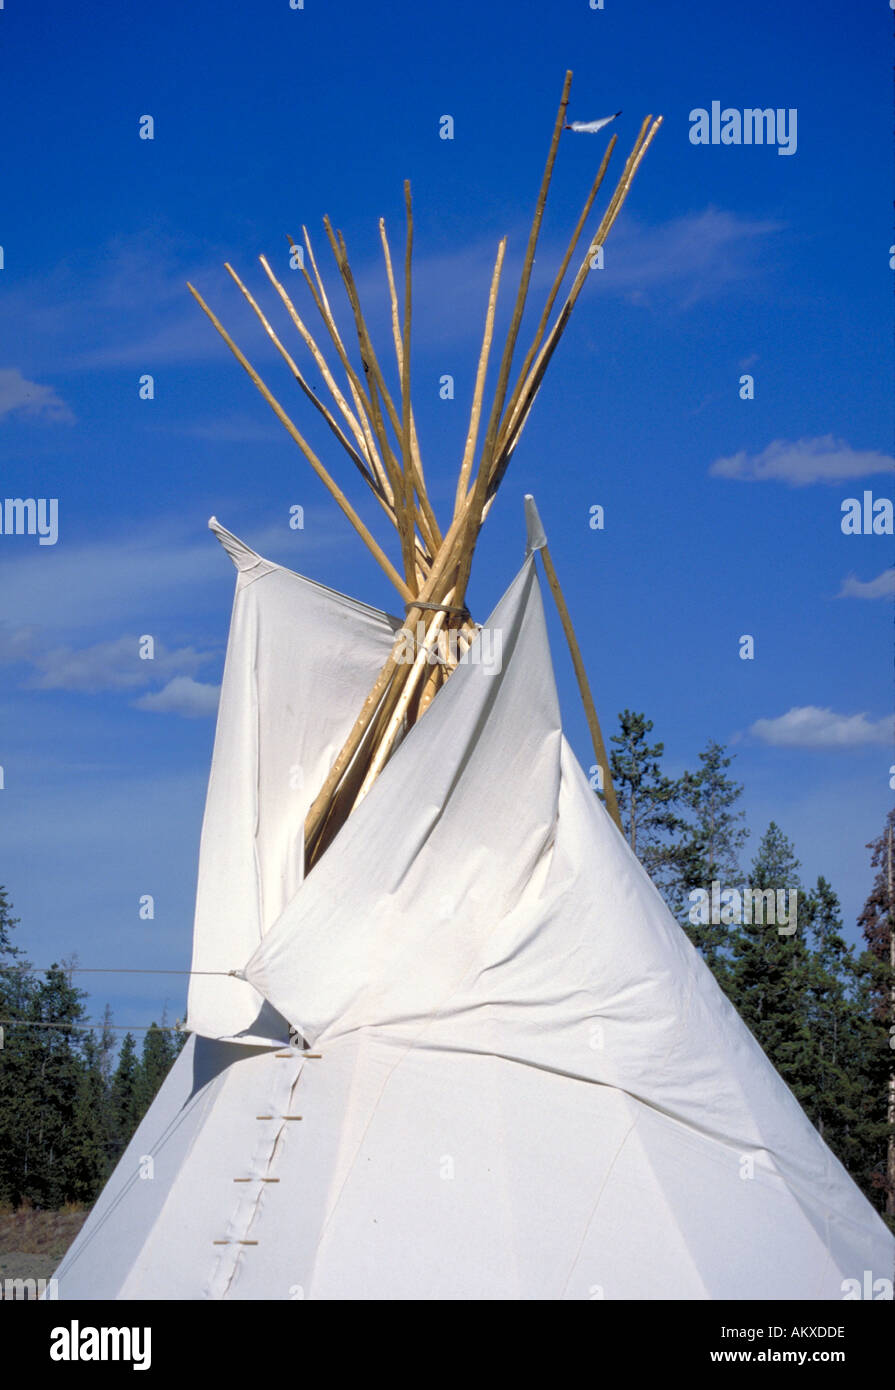 An American Indian tepee with wooden supports exposed and joined at the top. Stock Photo